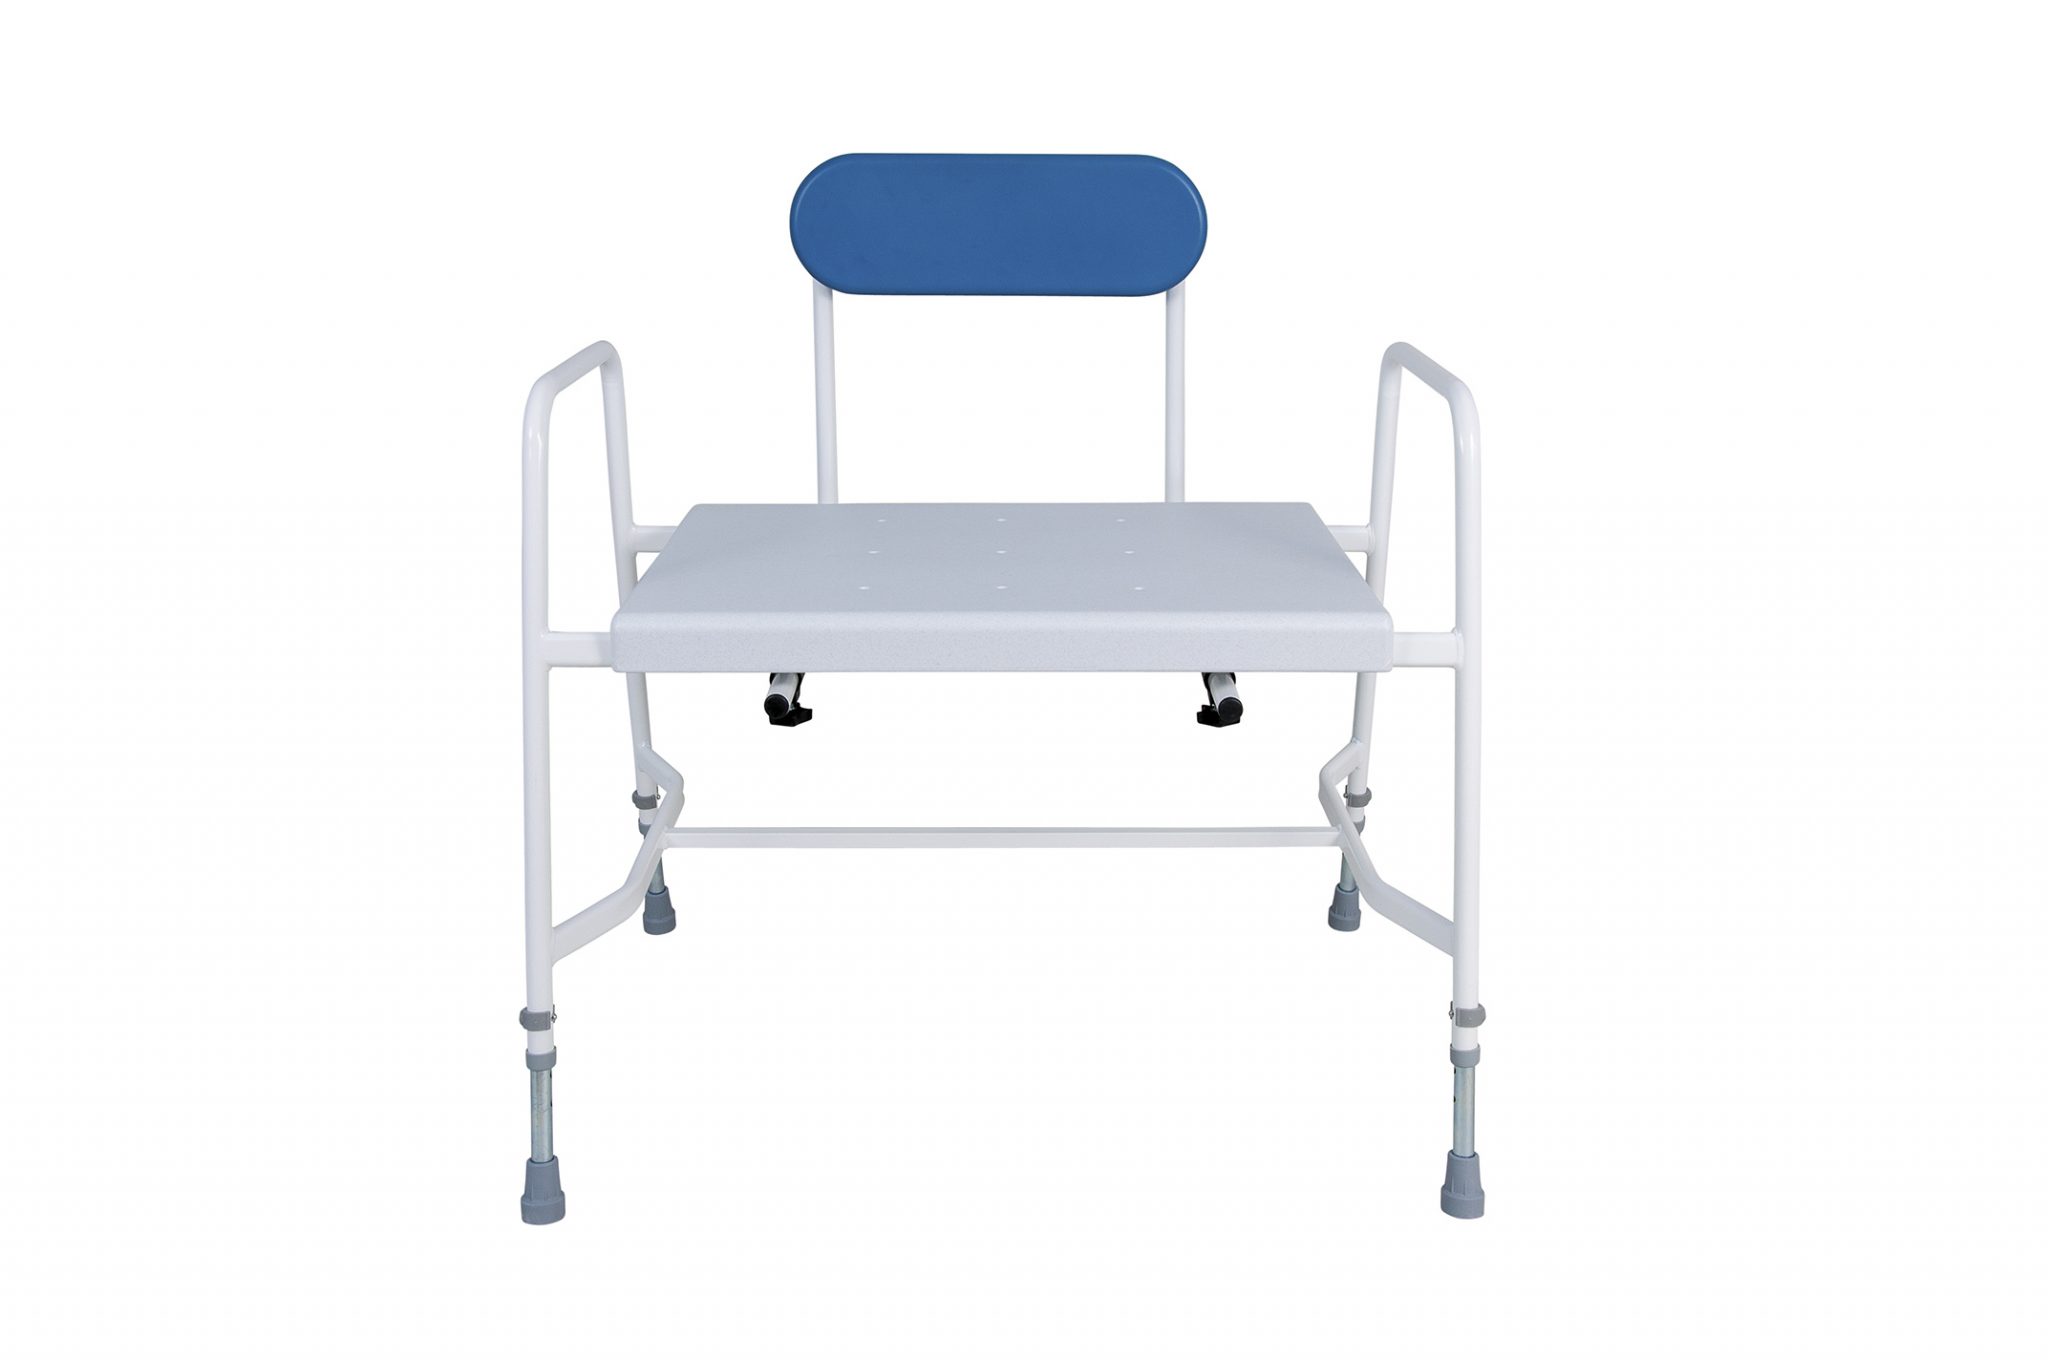 Bariatric equipment for heavy duty users - new range from Cefndy